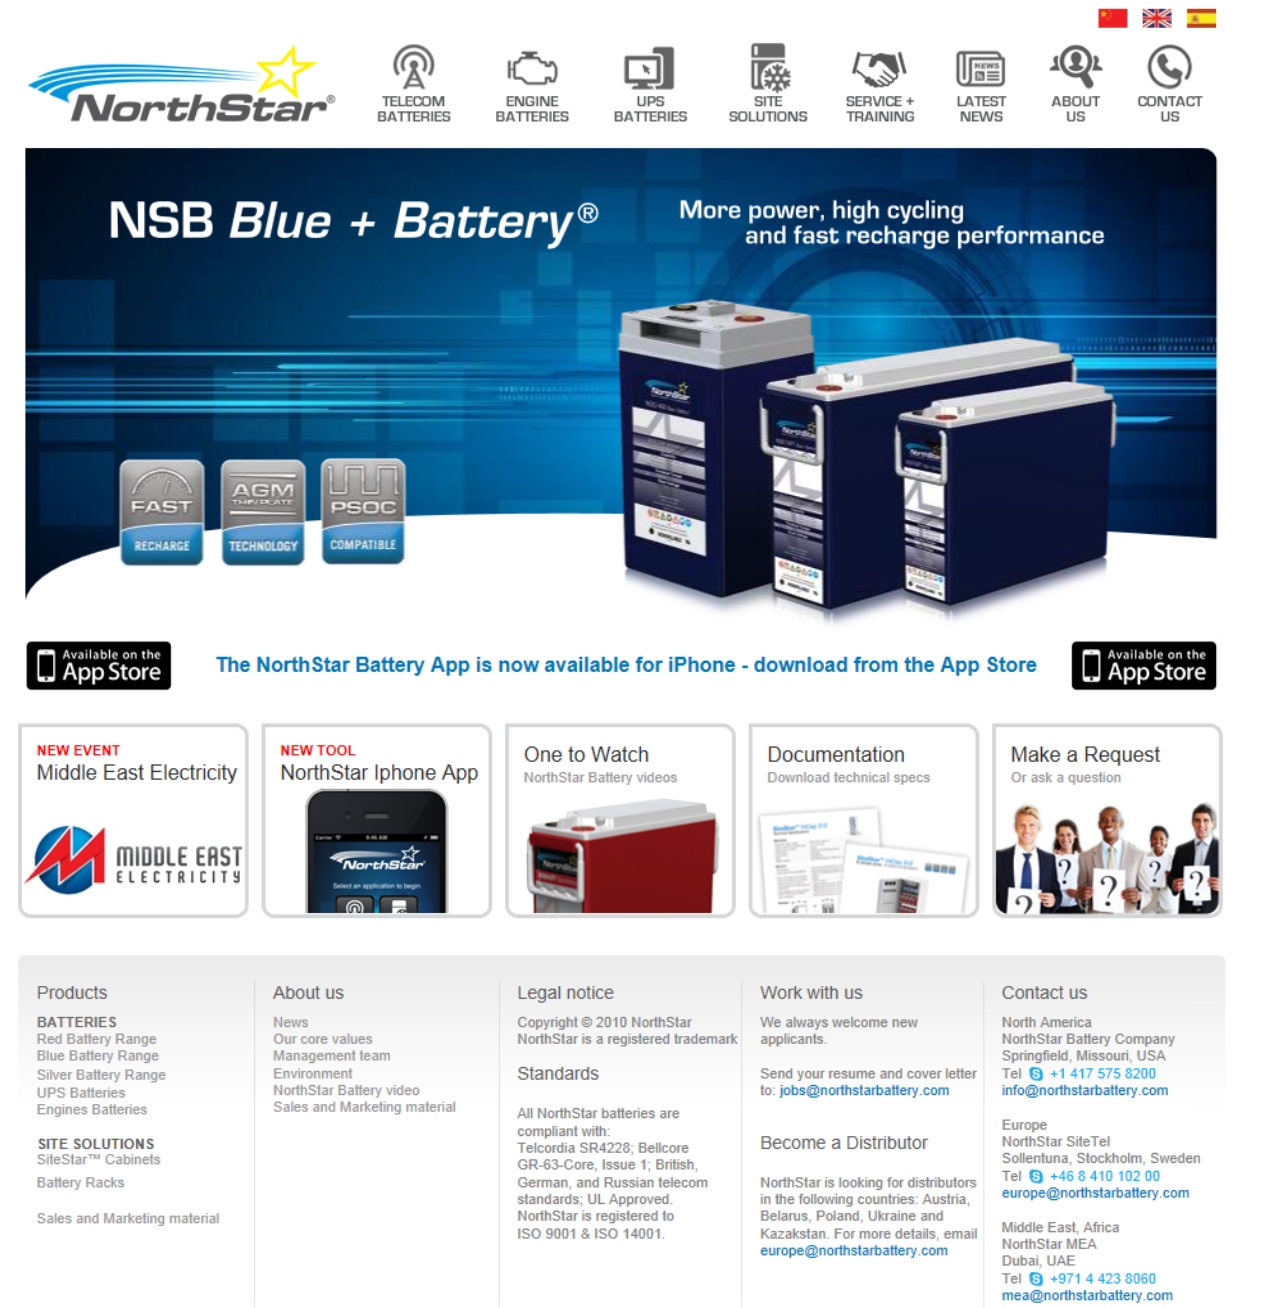 Batteries for UPS and Telecommunications 